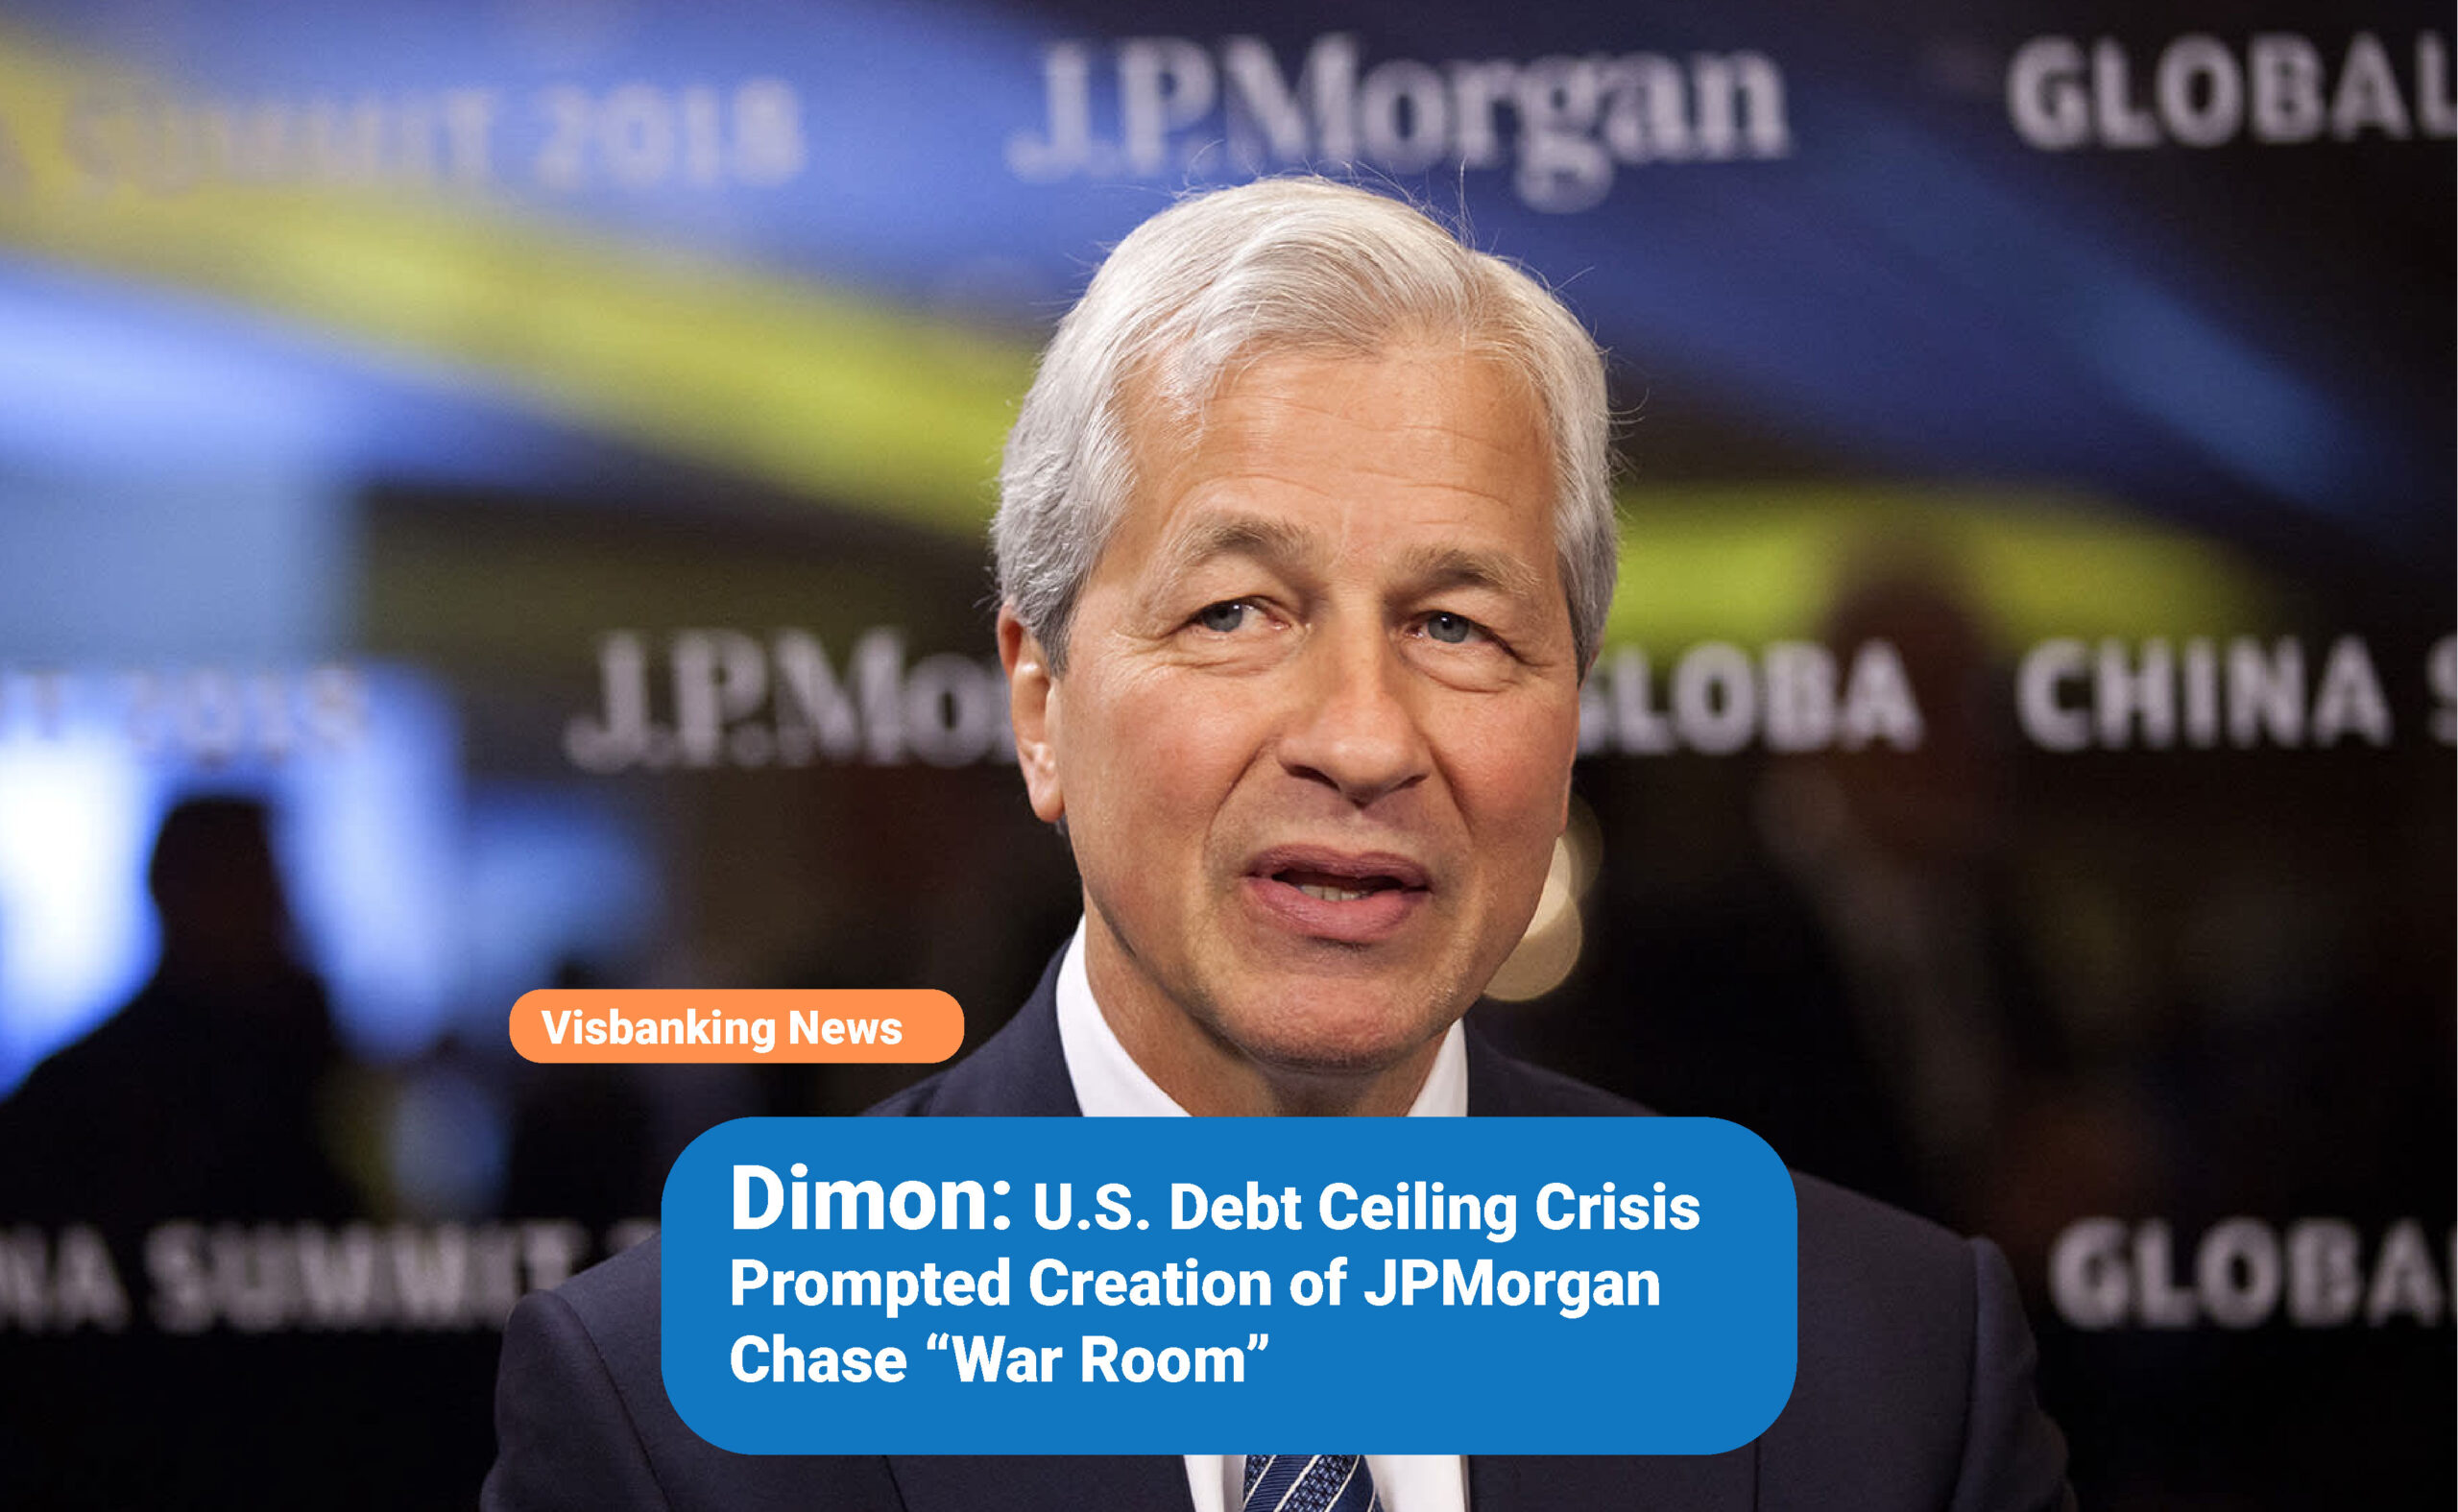 Dimon: U.S. Debt Ceiling Crisis Prompted Creation of JPMorgan Chase “War Room”